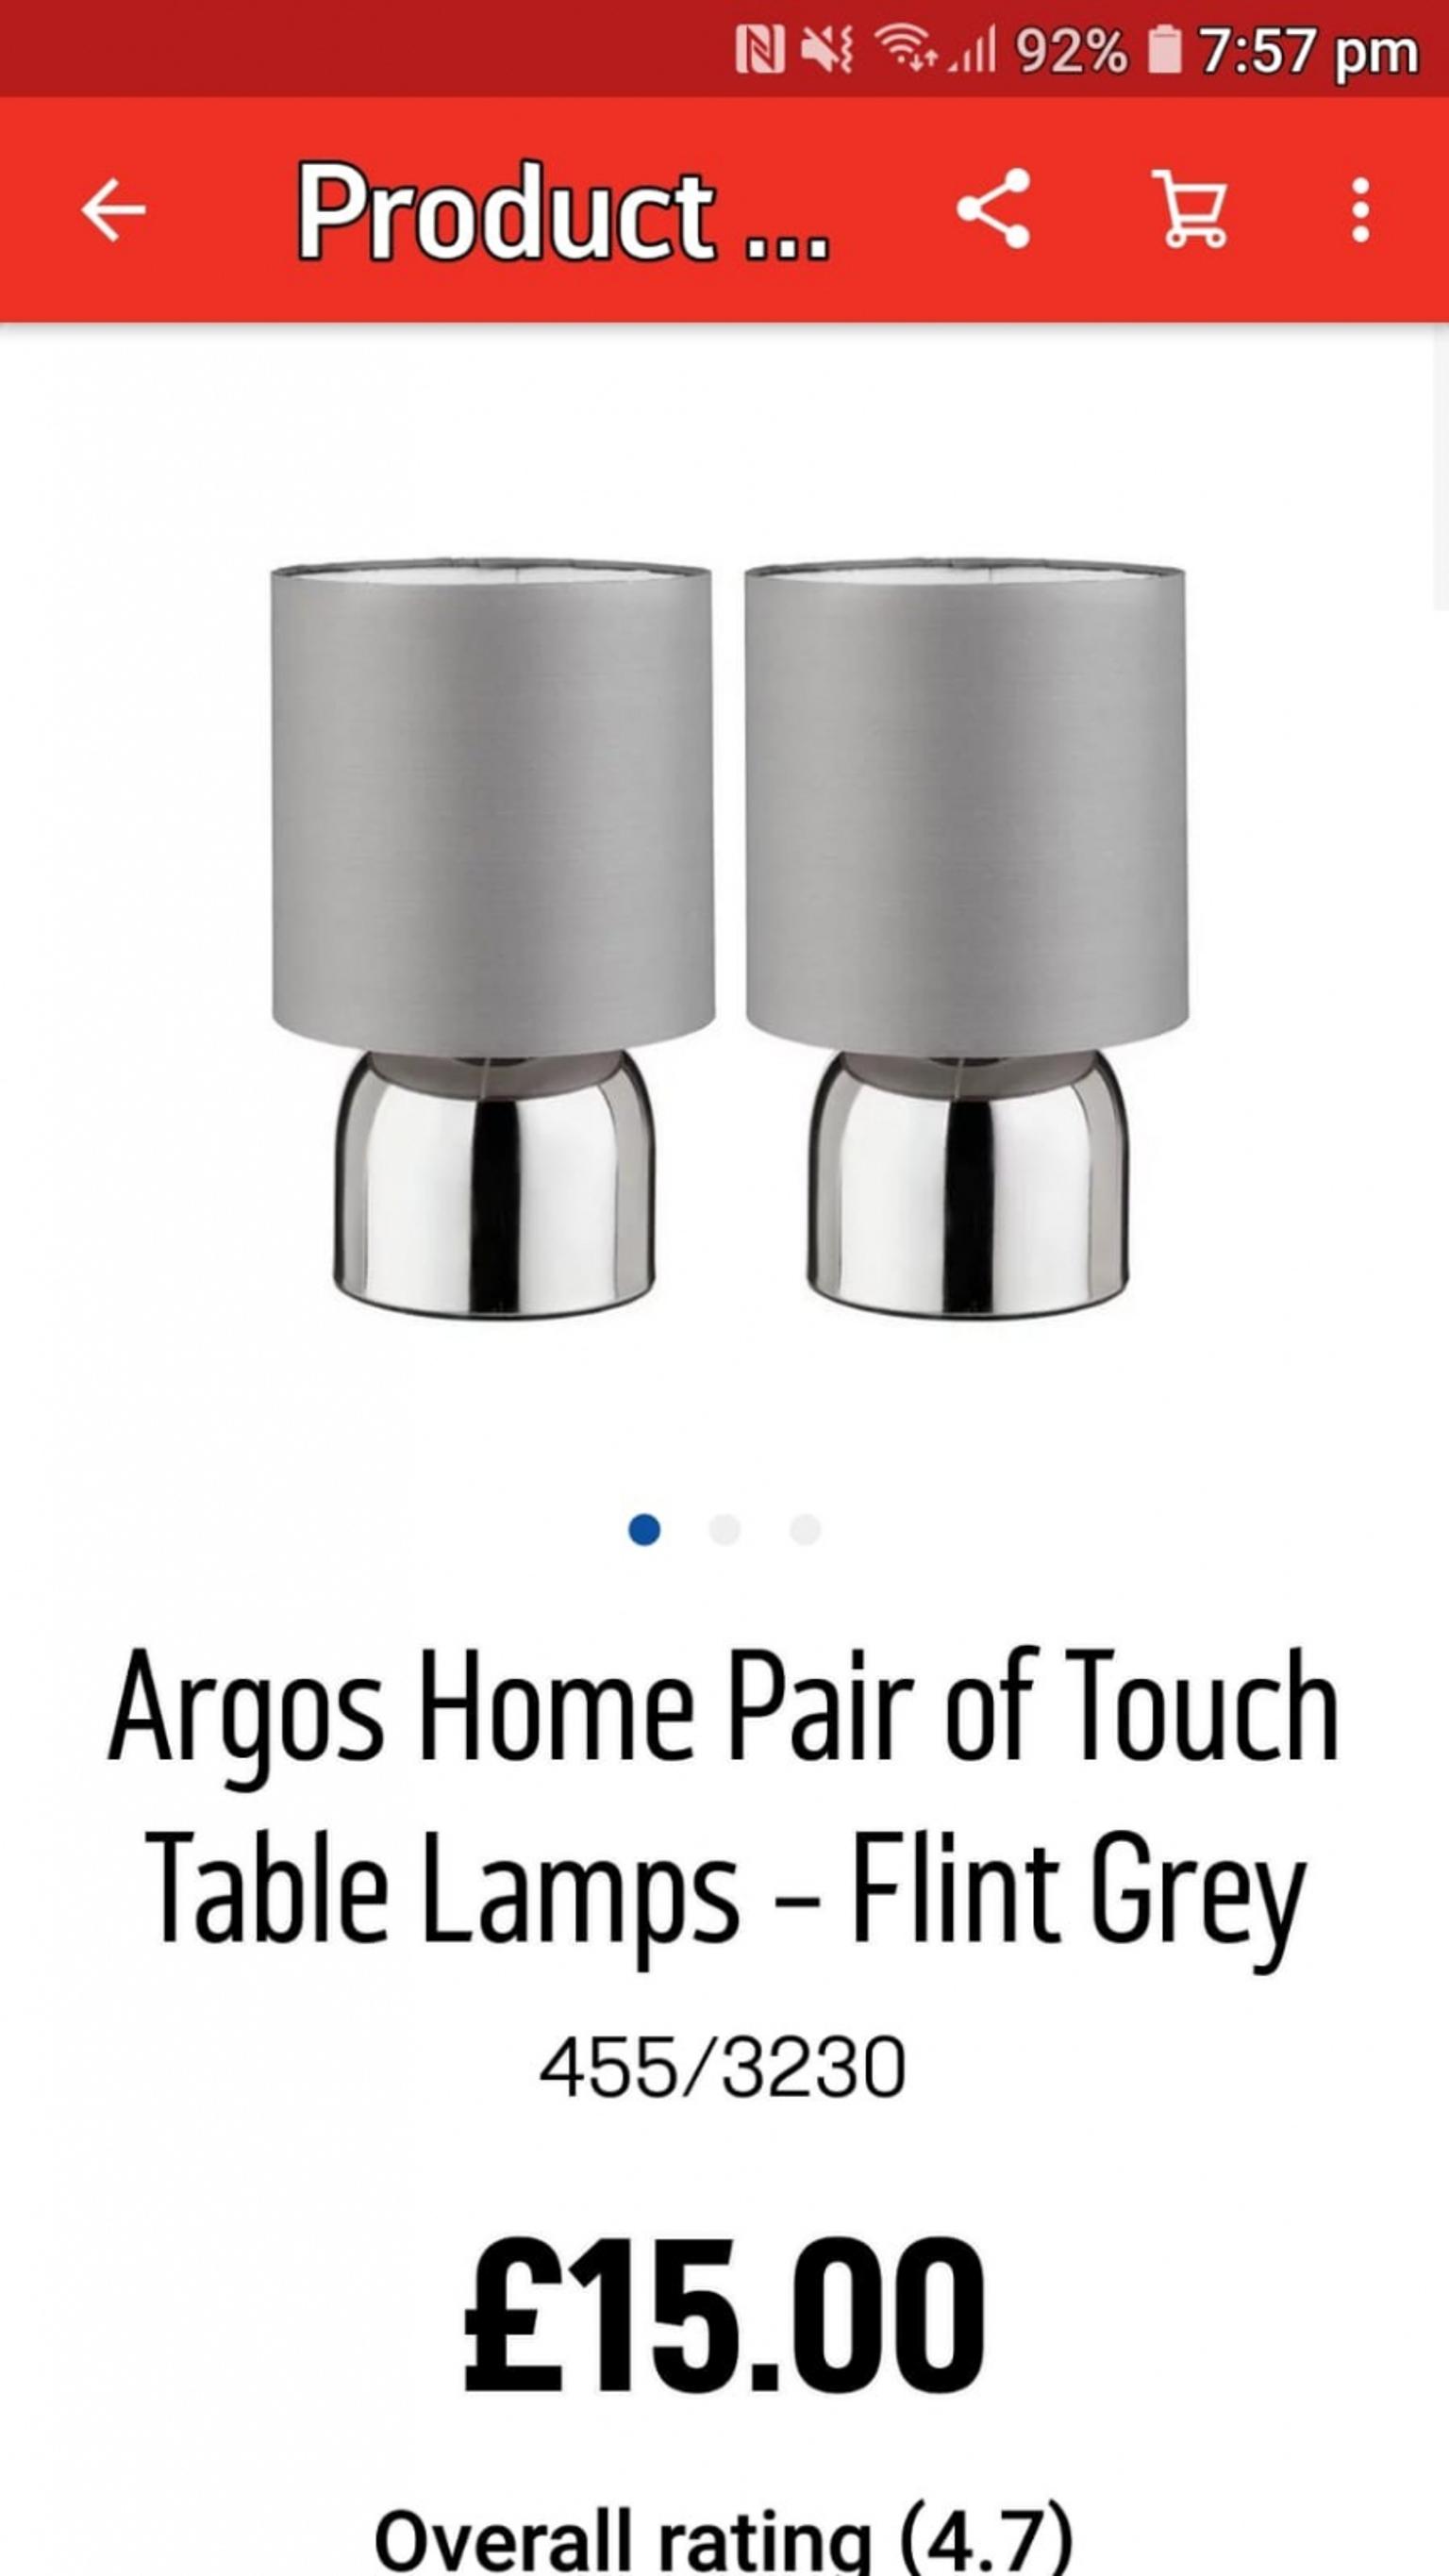 Touch Lamps In Fy1 Bispham For 2 00, Argos Home Pair Of Touch Table Lamps Flint Grey